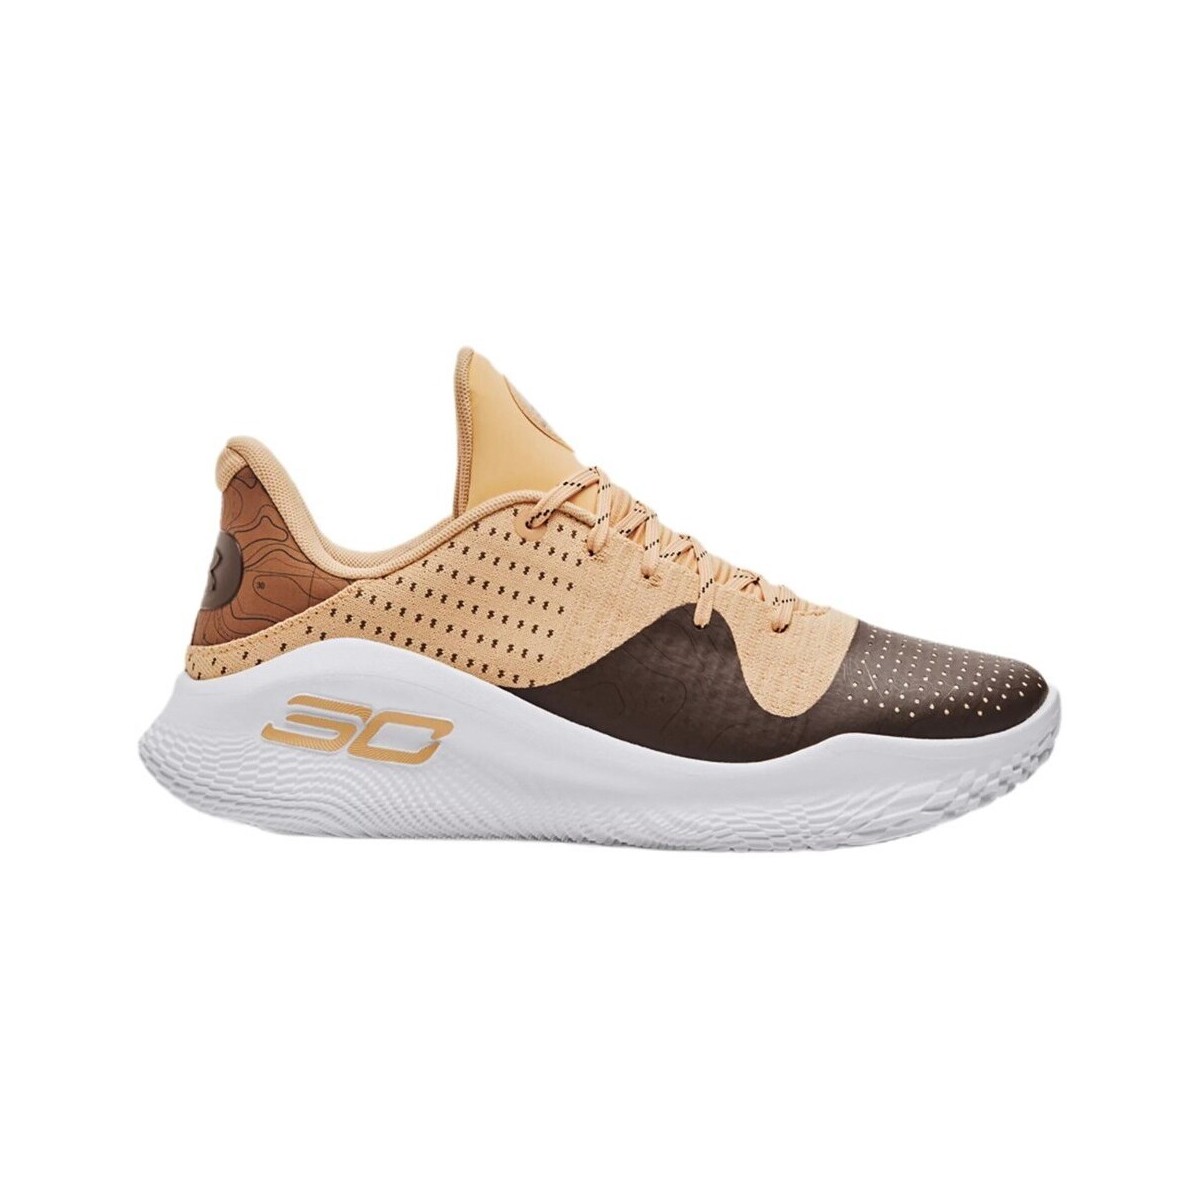 Under Armour Curry 4 Low Flotro Cc Brown